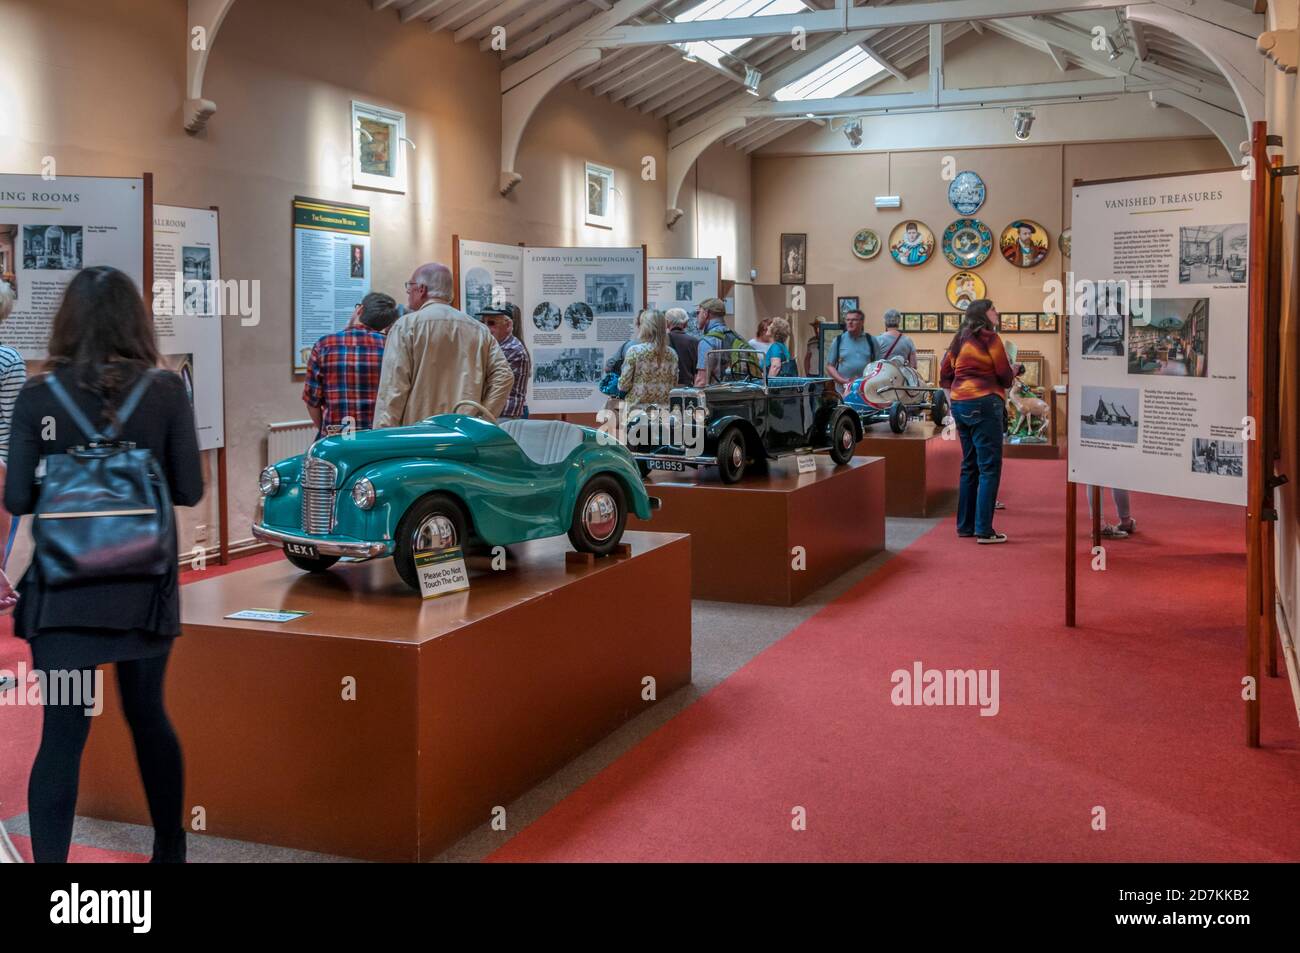 Inside the Sandringham Exhibition and Transport Museum inside the old stables. Stock Photo